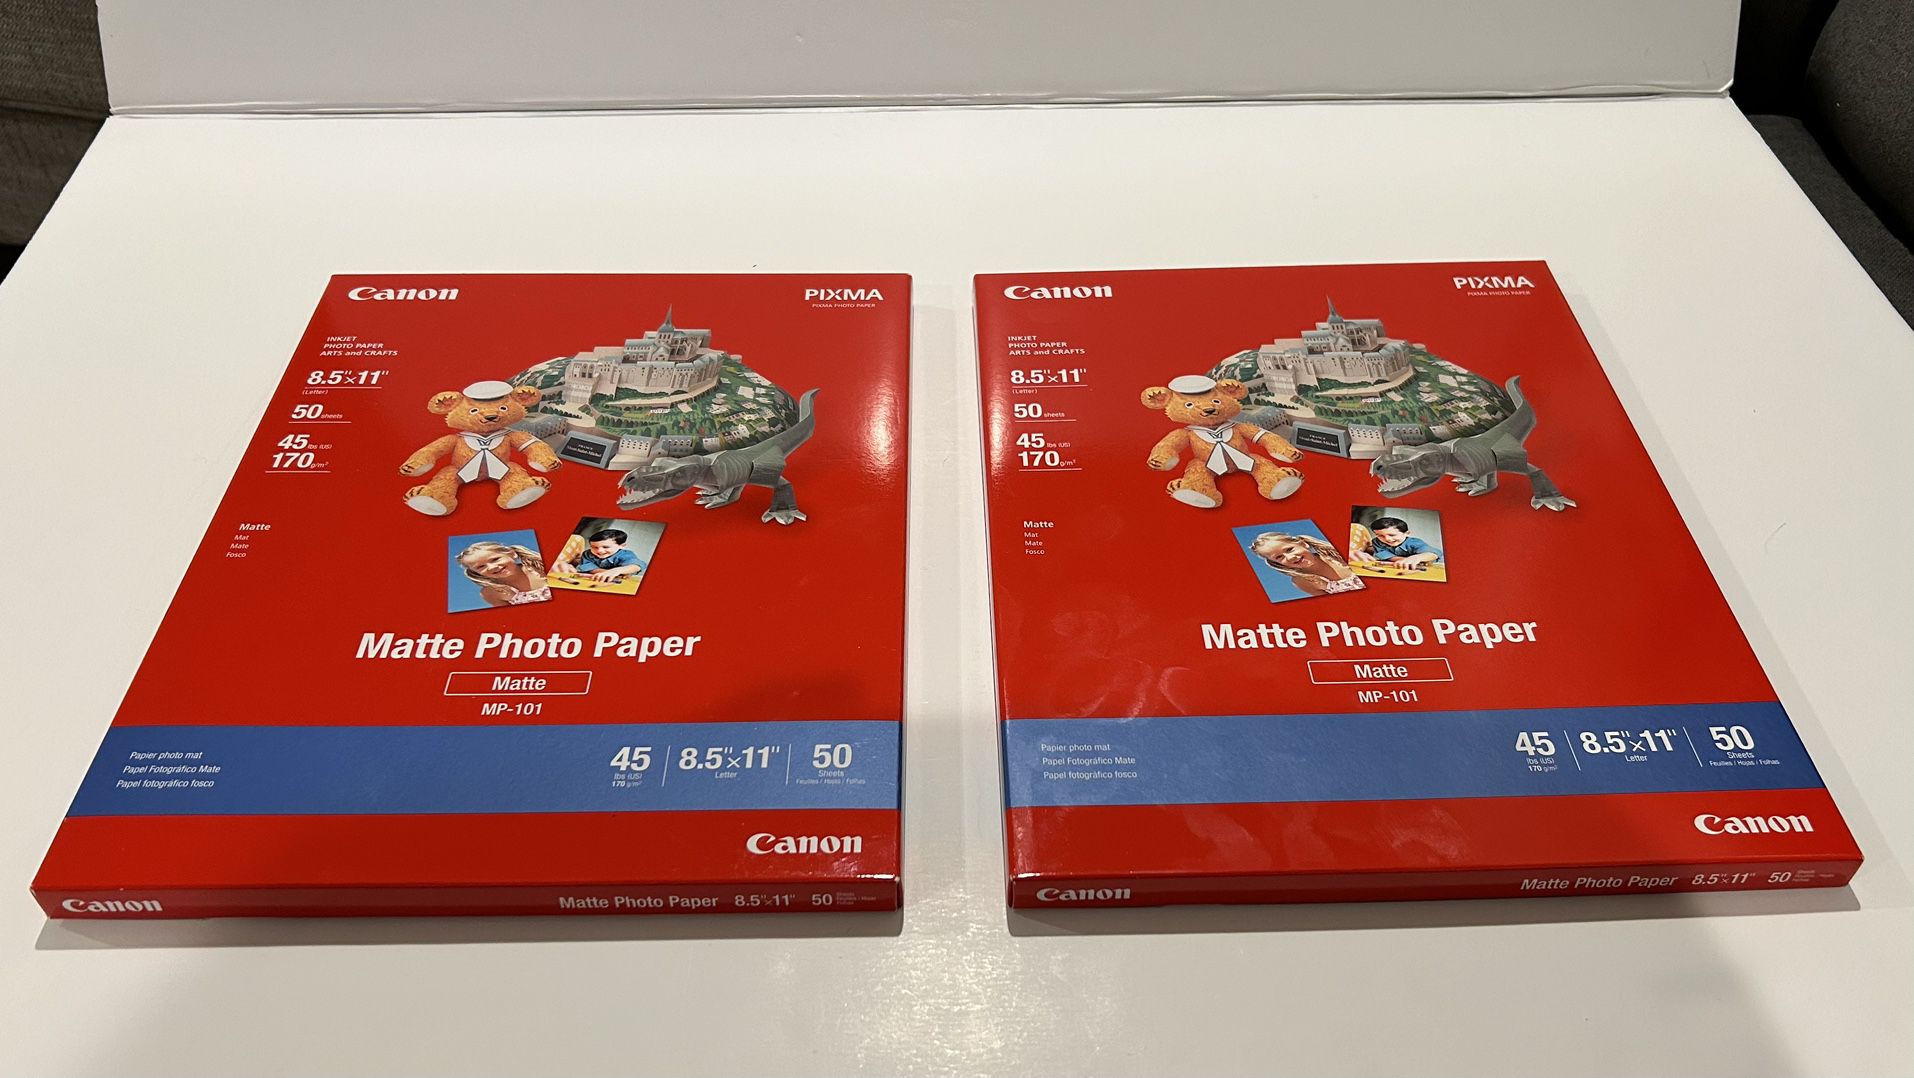 2 Canon Matte Photo Paper, 8.5 x 11 Inch, 50 Count (7981A004) (2 PACKS)